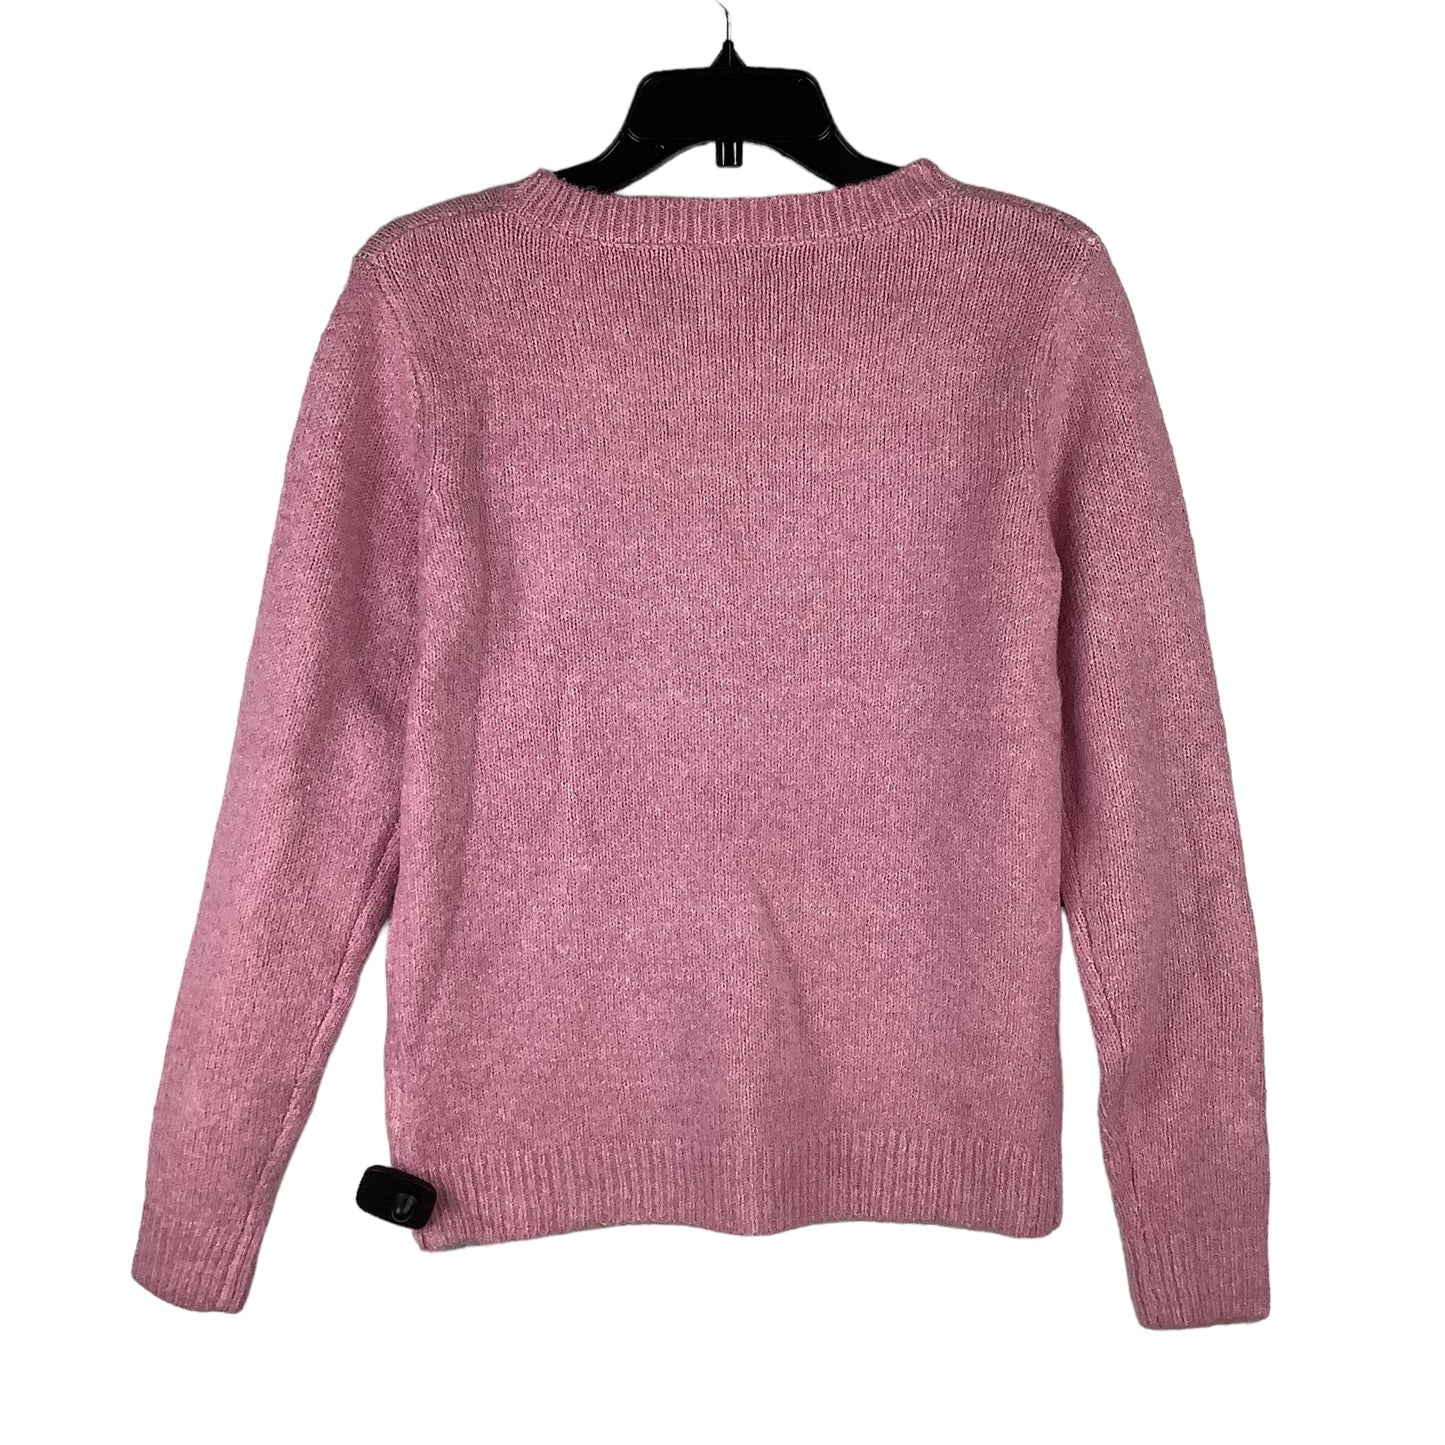 Sweater By Cupcakes And Cashmere  Size: Xs